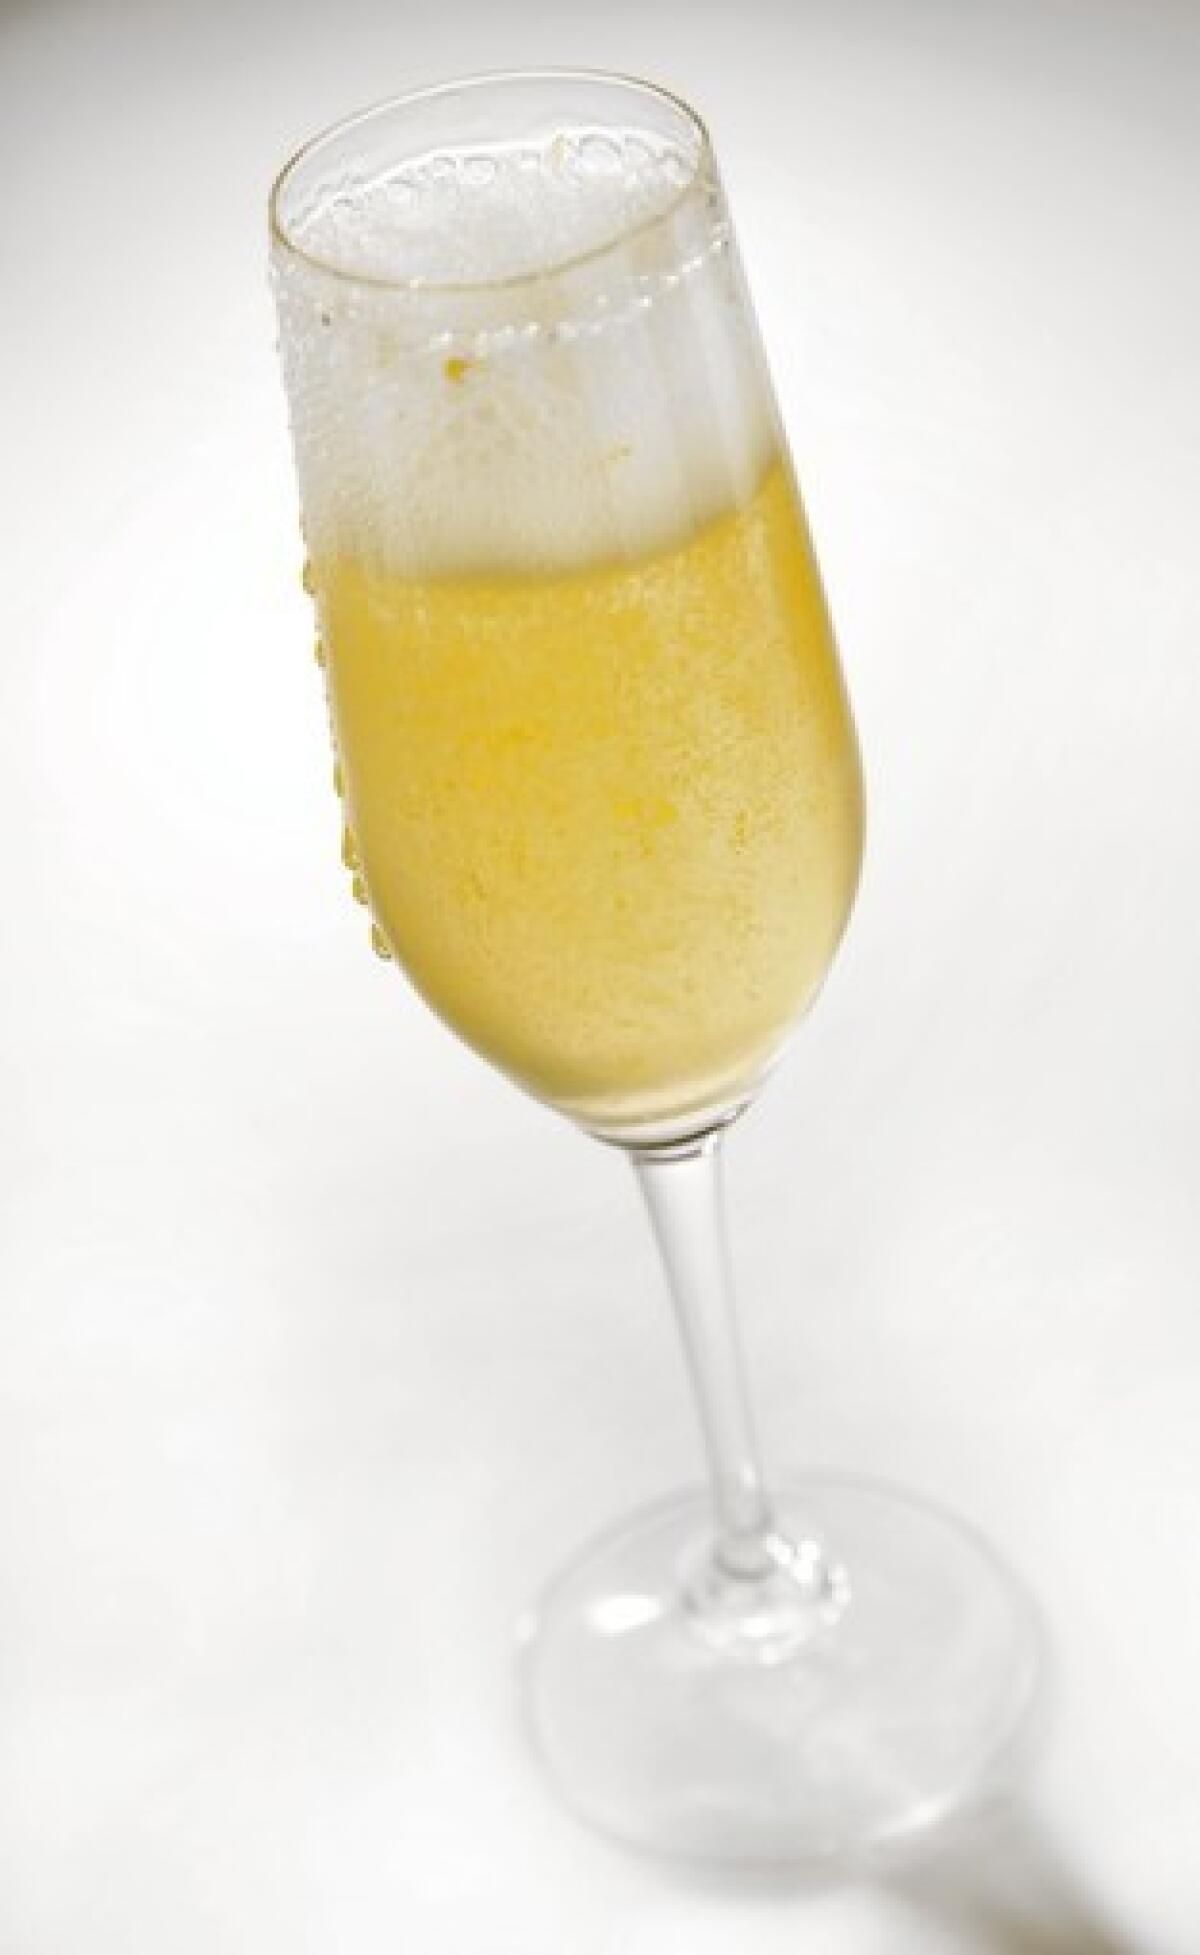 The Mr. C Cocktail is made with Prosecco and mandarin puree.